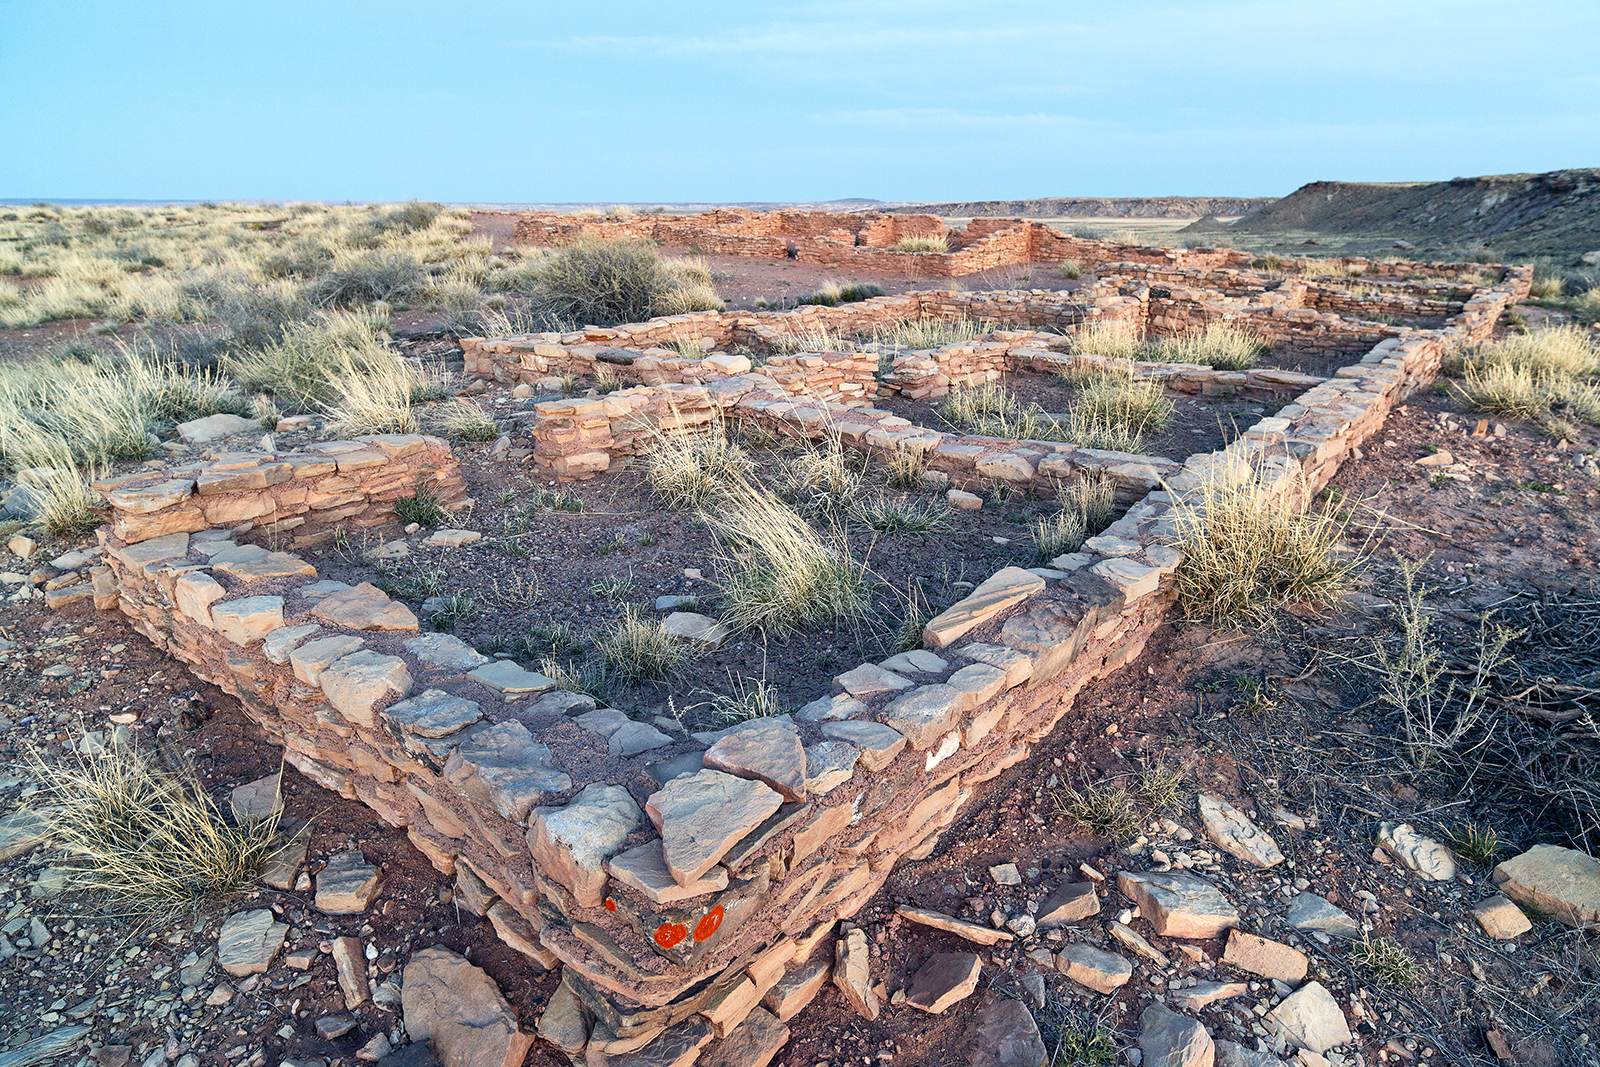 Masonry wall foundations are all that are left of a hundred room pueblo